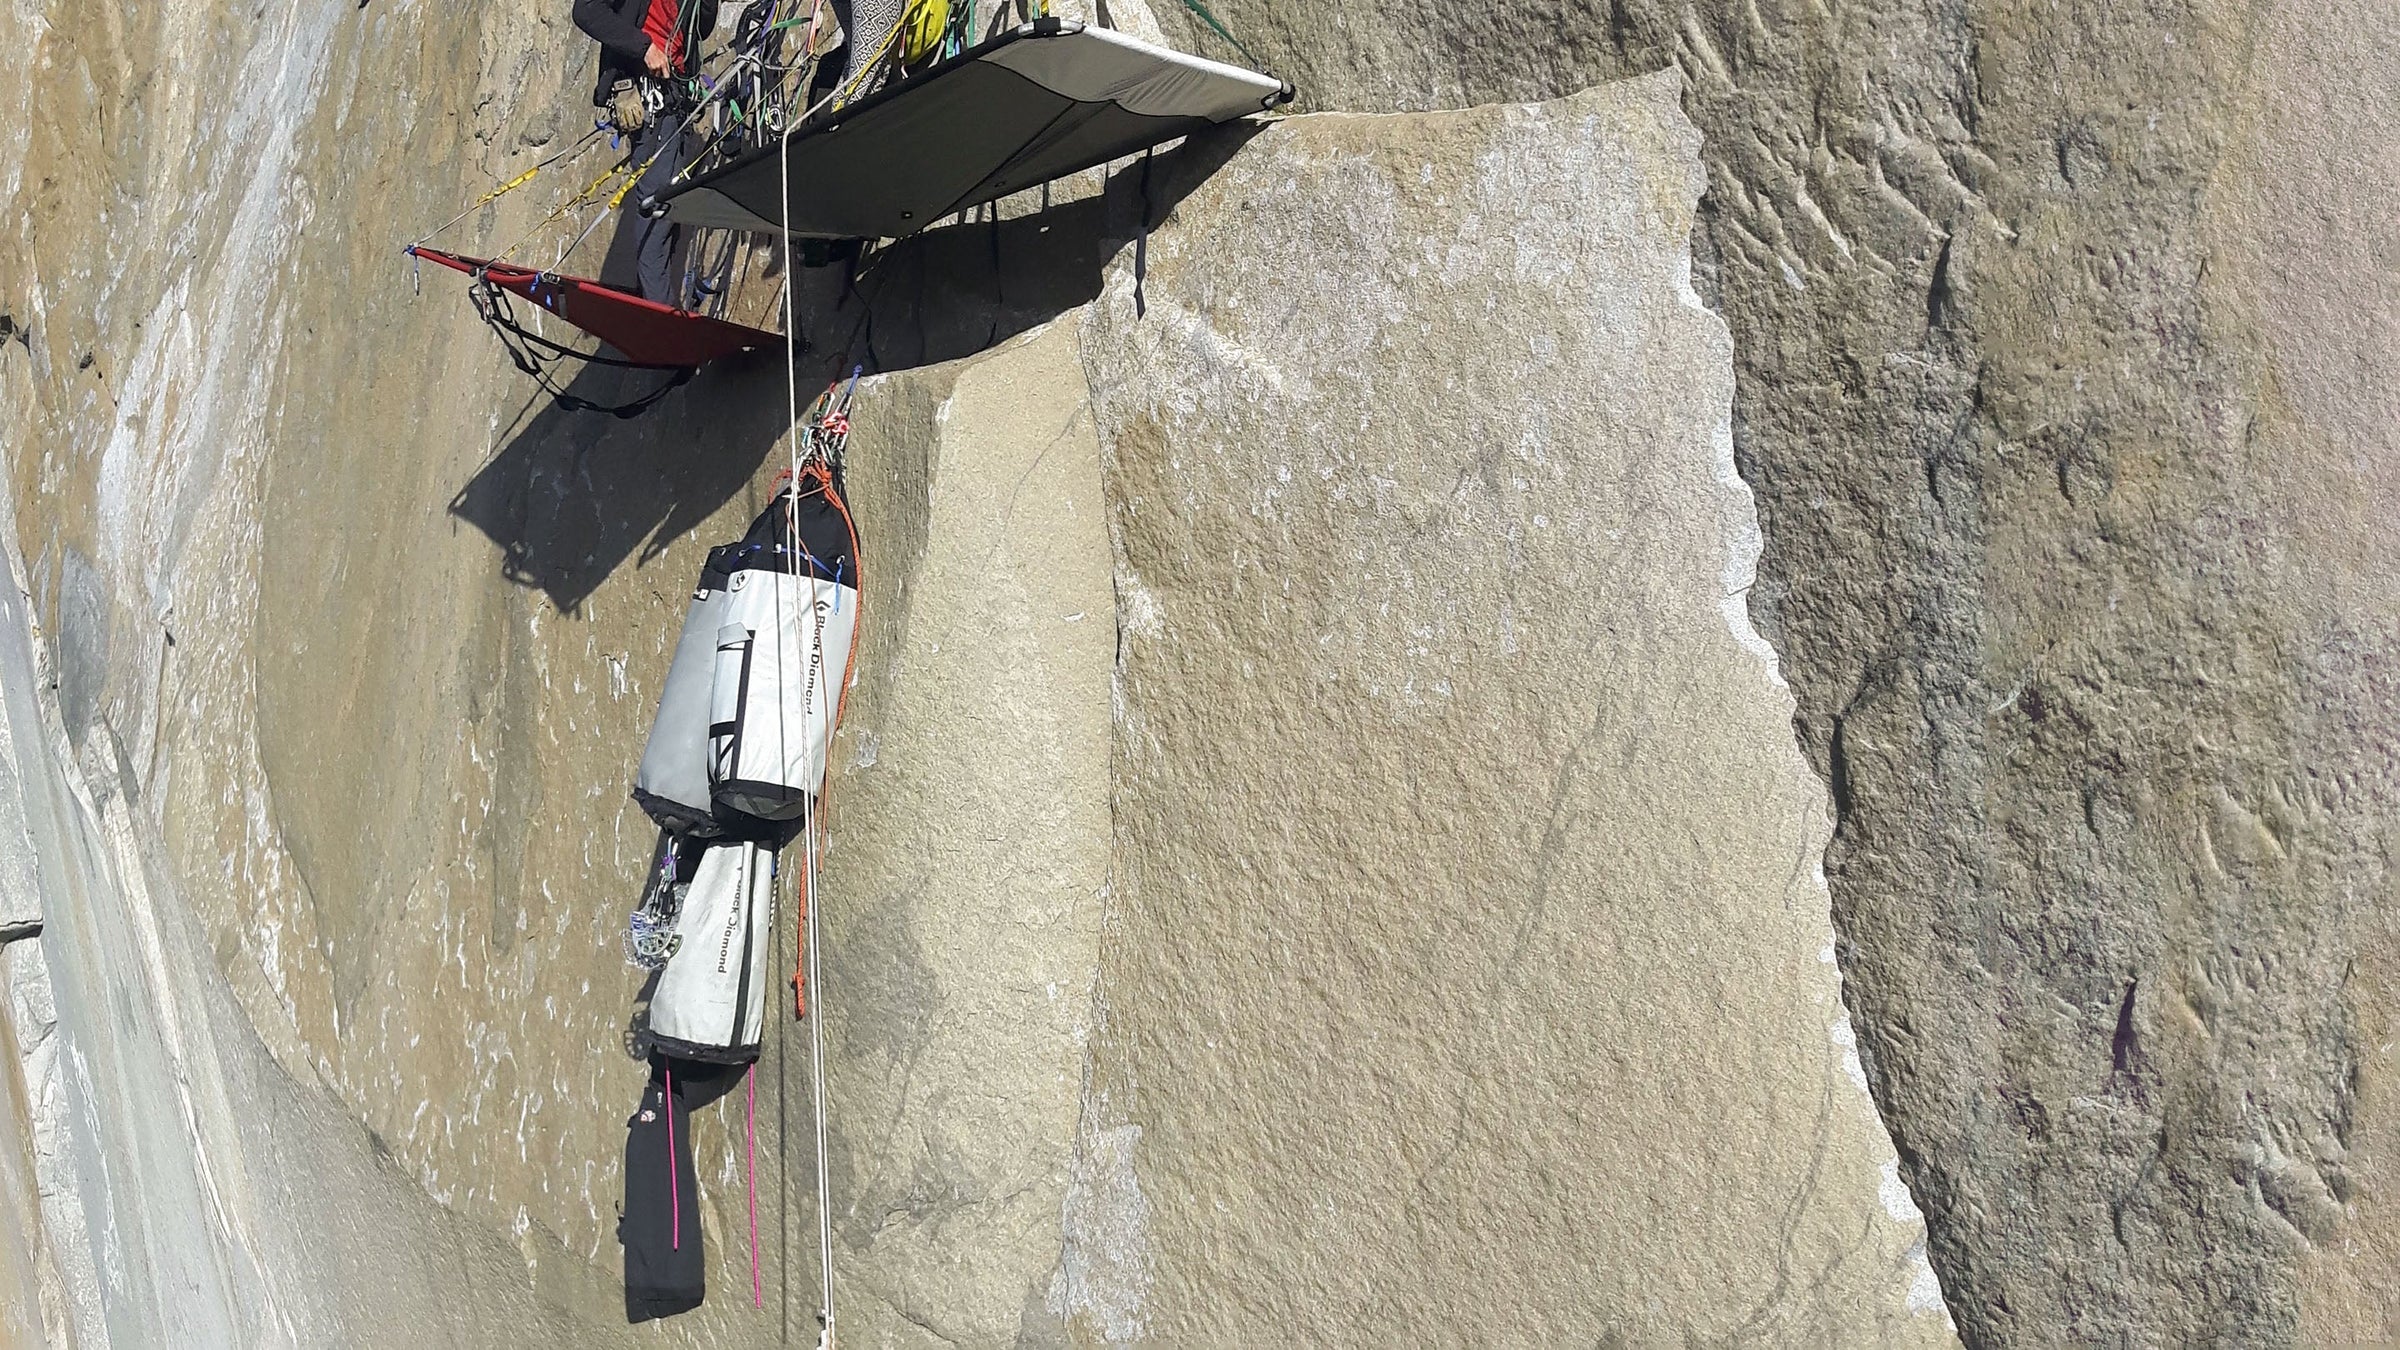 Haul bags are suspended from a rope on the side of a tall rock face in Yosemite National Park